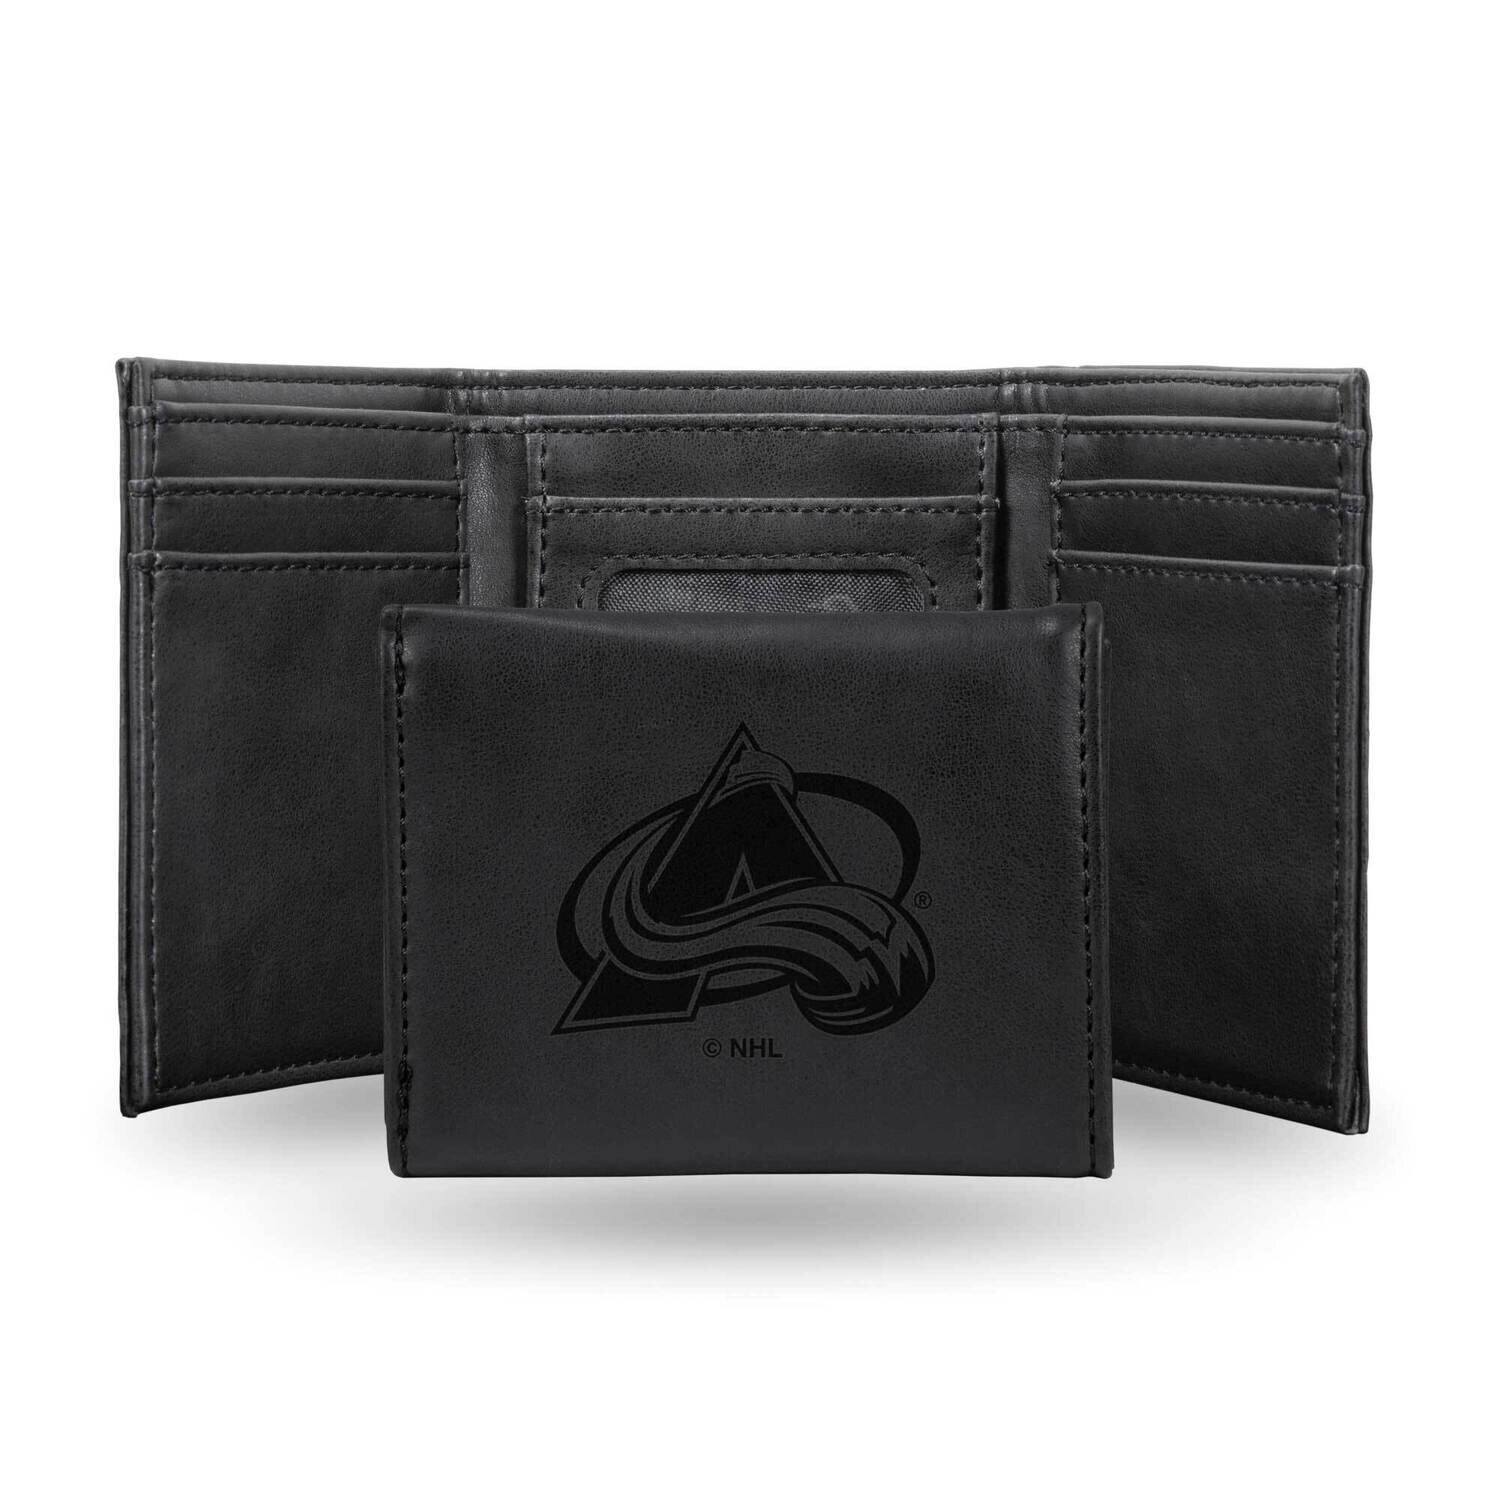 NHL Colorado Avalanche Black Faux Leather Trifold Wallet GC7822